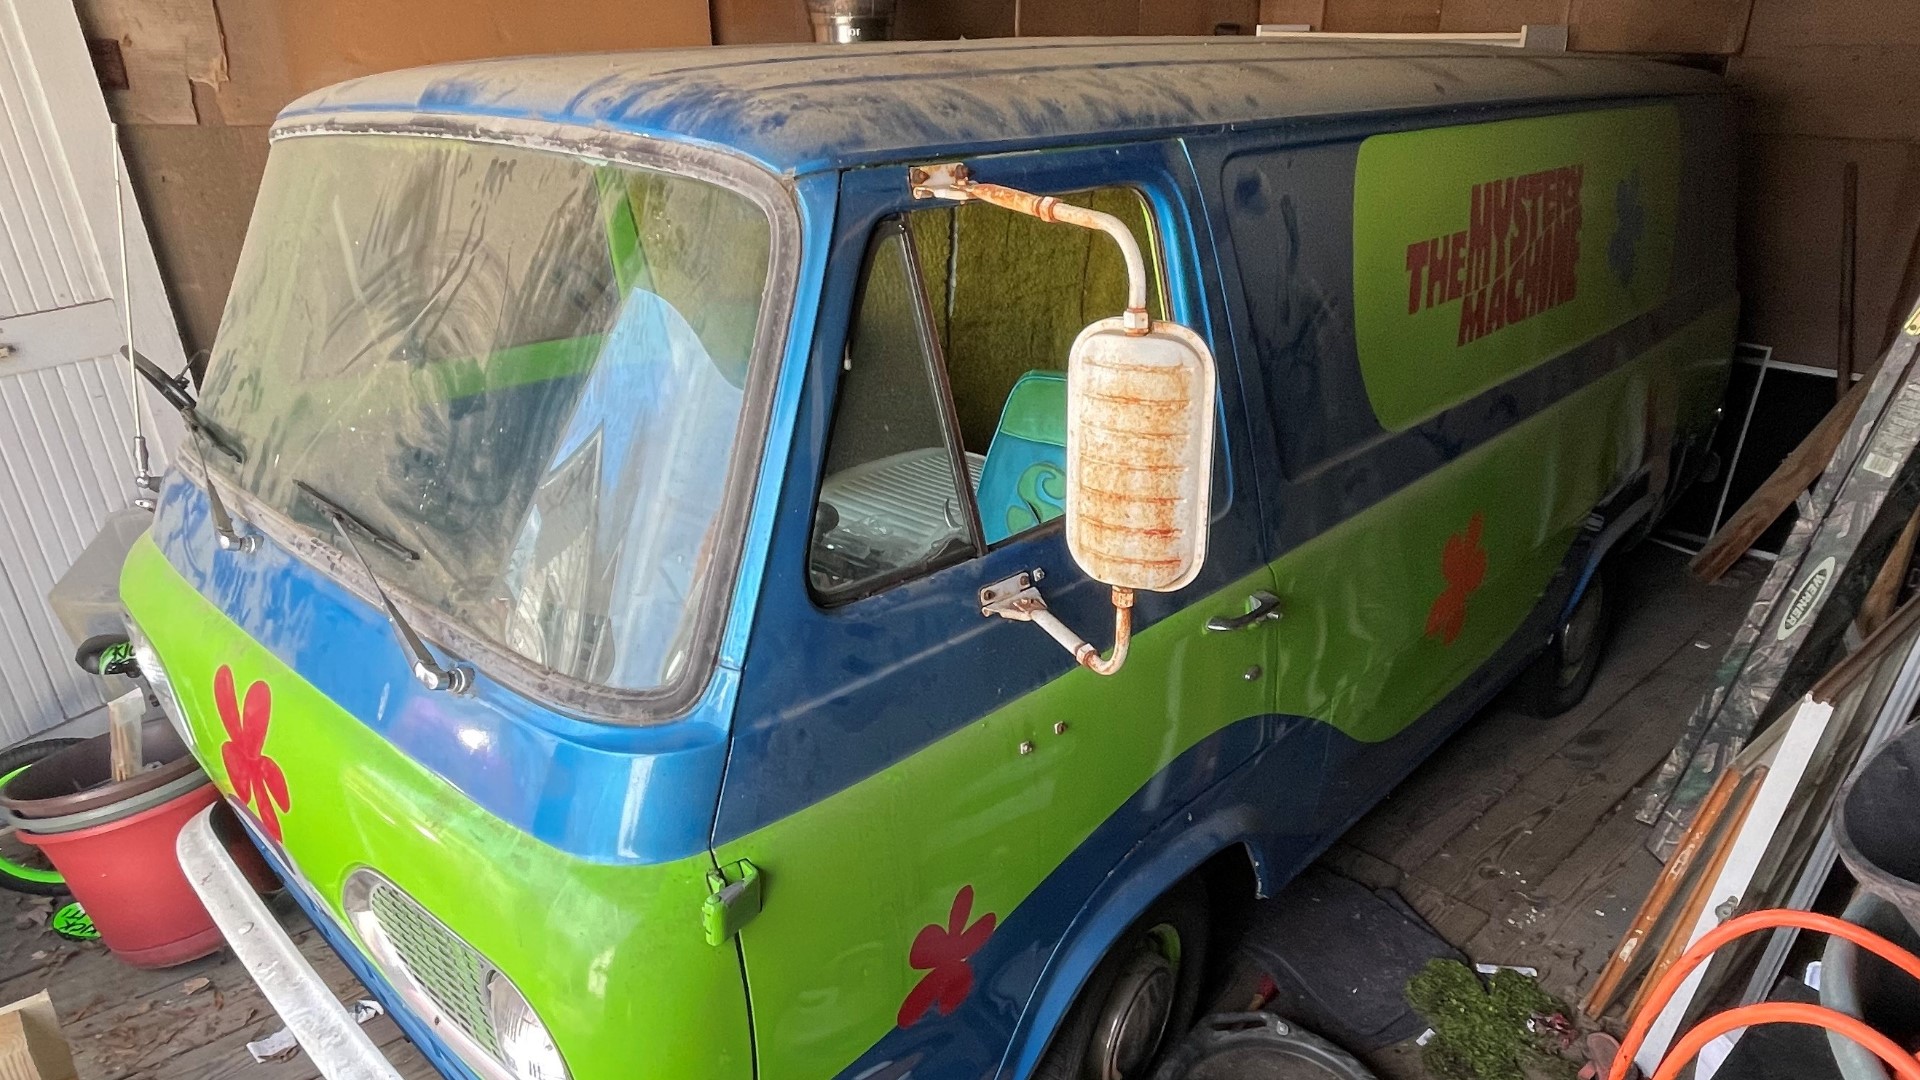 You could own the iconic blue and green van for $10,000.